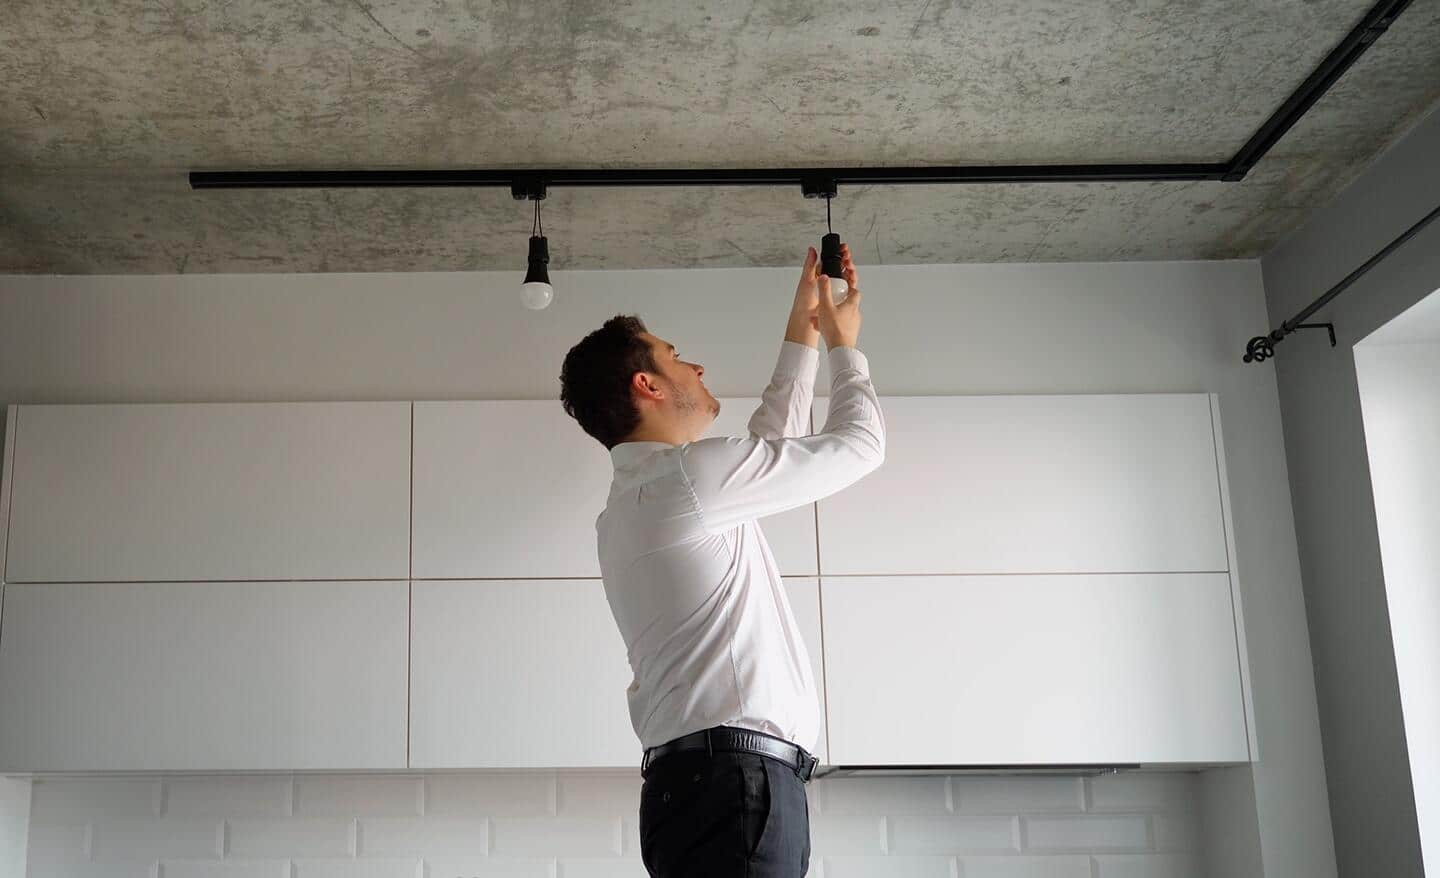 A person adjusts one of the fixtures of track lighting in front of a row of white cabinets.